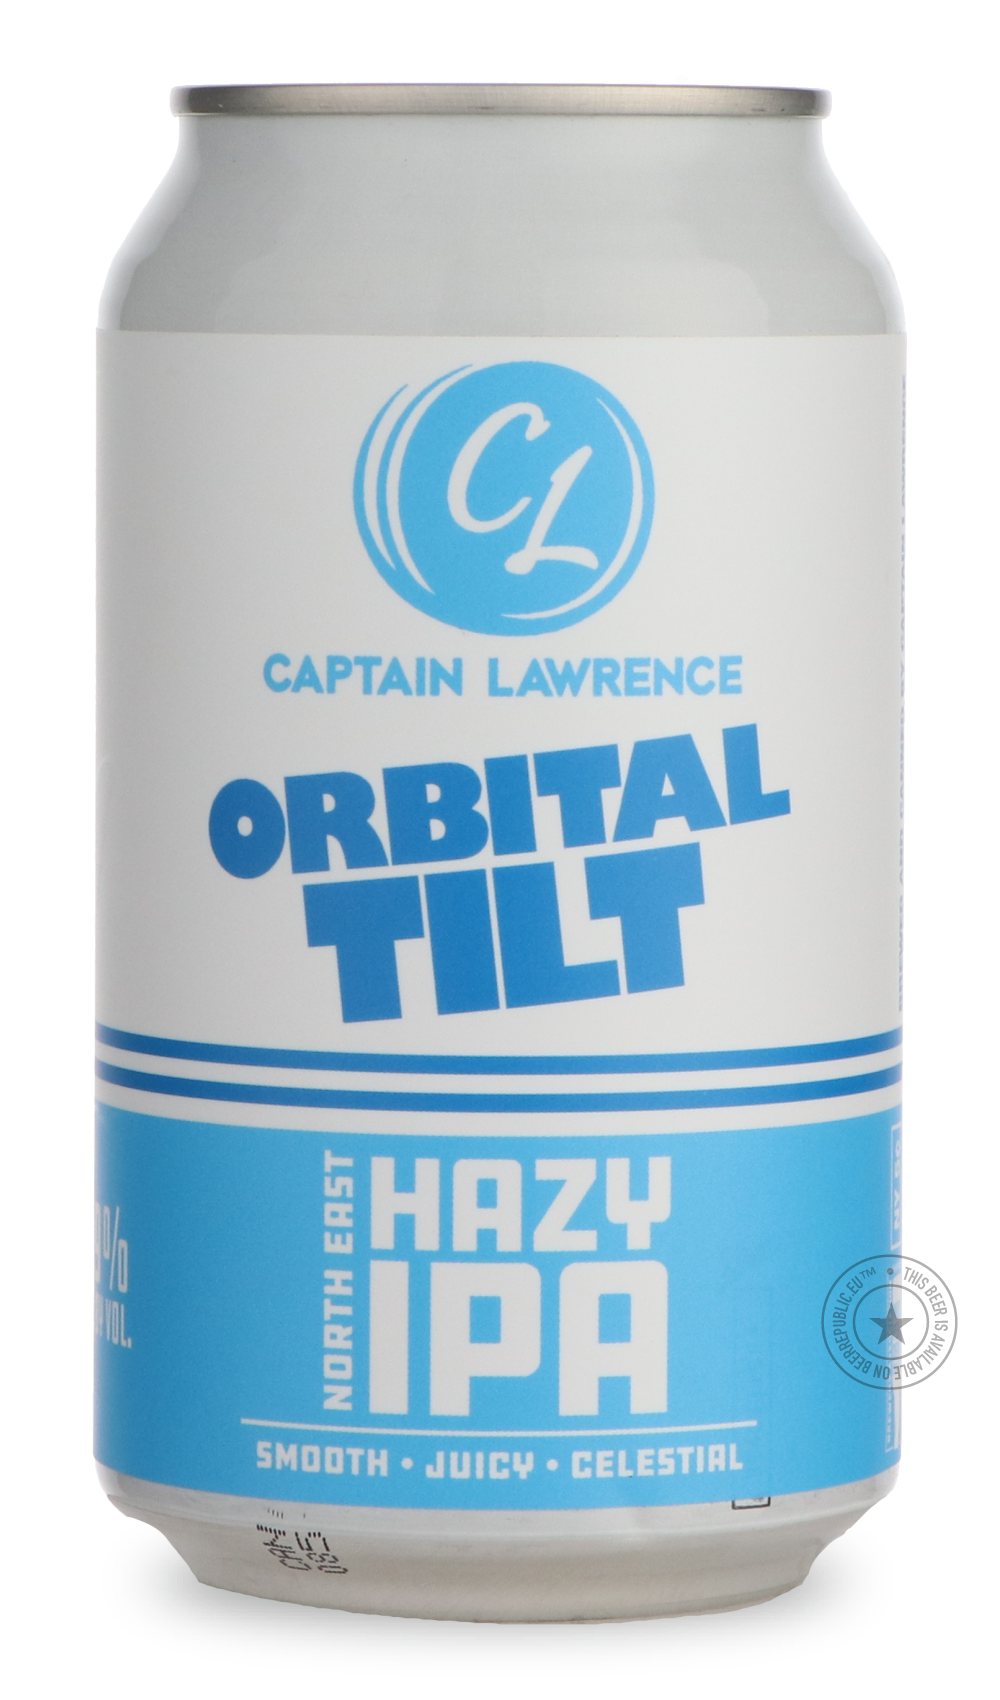 -Captain Lawrence- Orbital Tilt (Mosaic)-IPA- Only @ Beer Republic - The best online beer store for American & Canadian craft beer - Buy beer online from the USA and Canada - Bier online kopen - Amerikaans bier kopen - Craft beer store - Craft beer kopen - Amerikanisch bier kaufen - Bier online kaufen - Acheter biere online - IPA - Stout - Porter - New England IPA - Hazy IPA - Imperial Stout - Barrel Aged - Barrel Aged Imperial Stout - Brown - Dark beer - Blond - Blonde - Pilsner - Lager - Wheat - Weizen - 